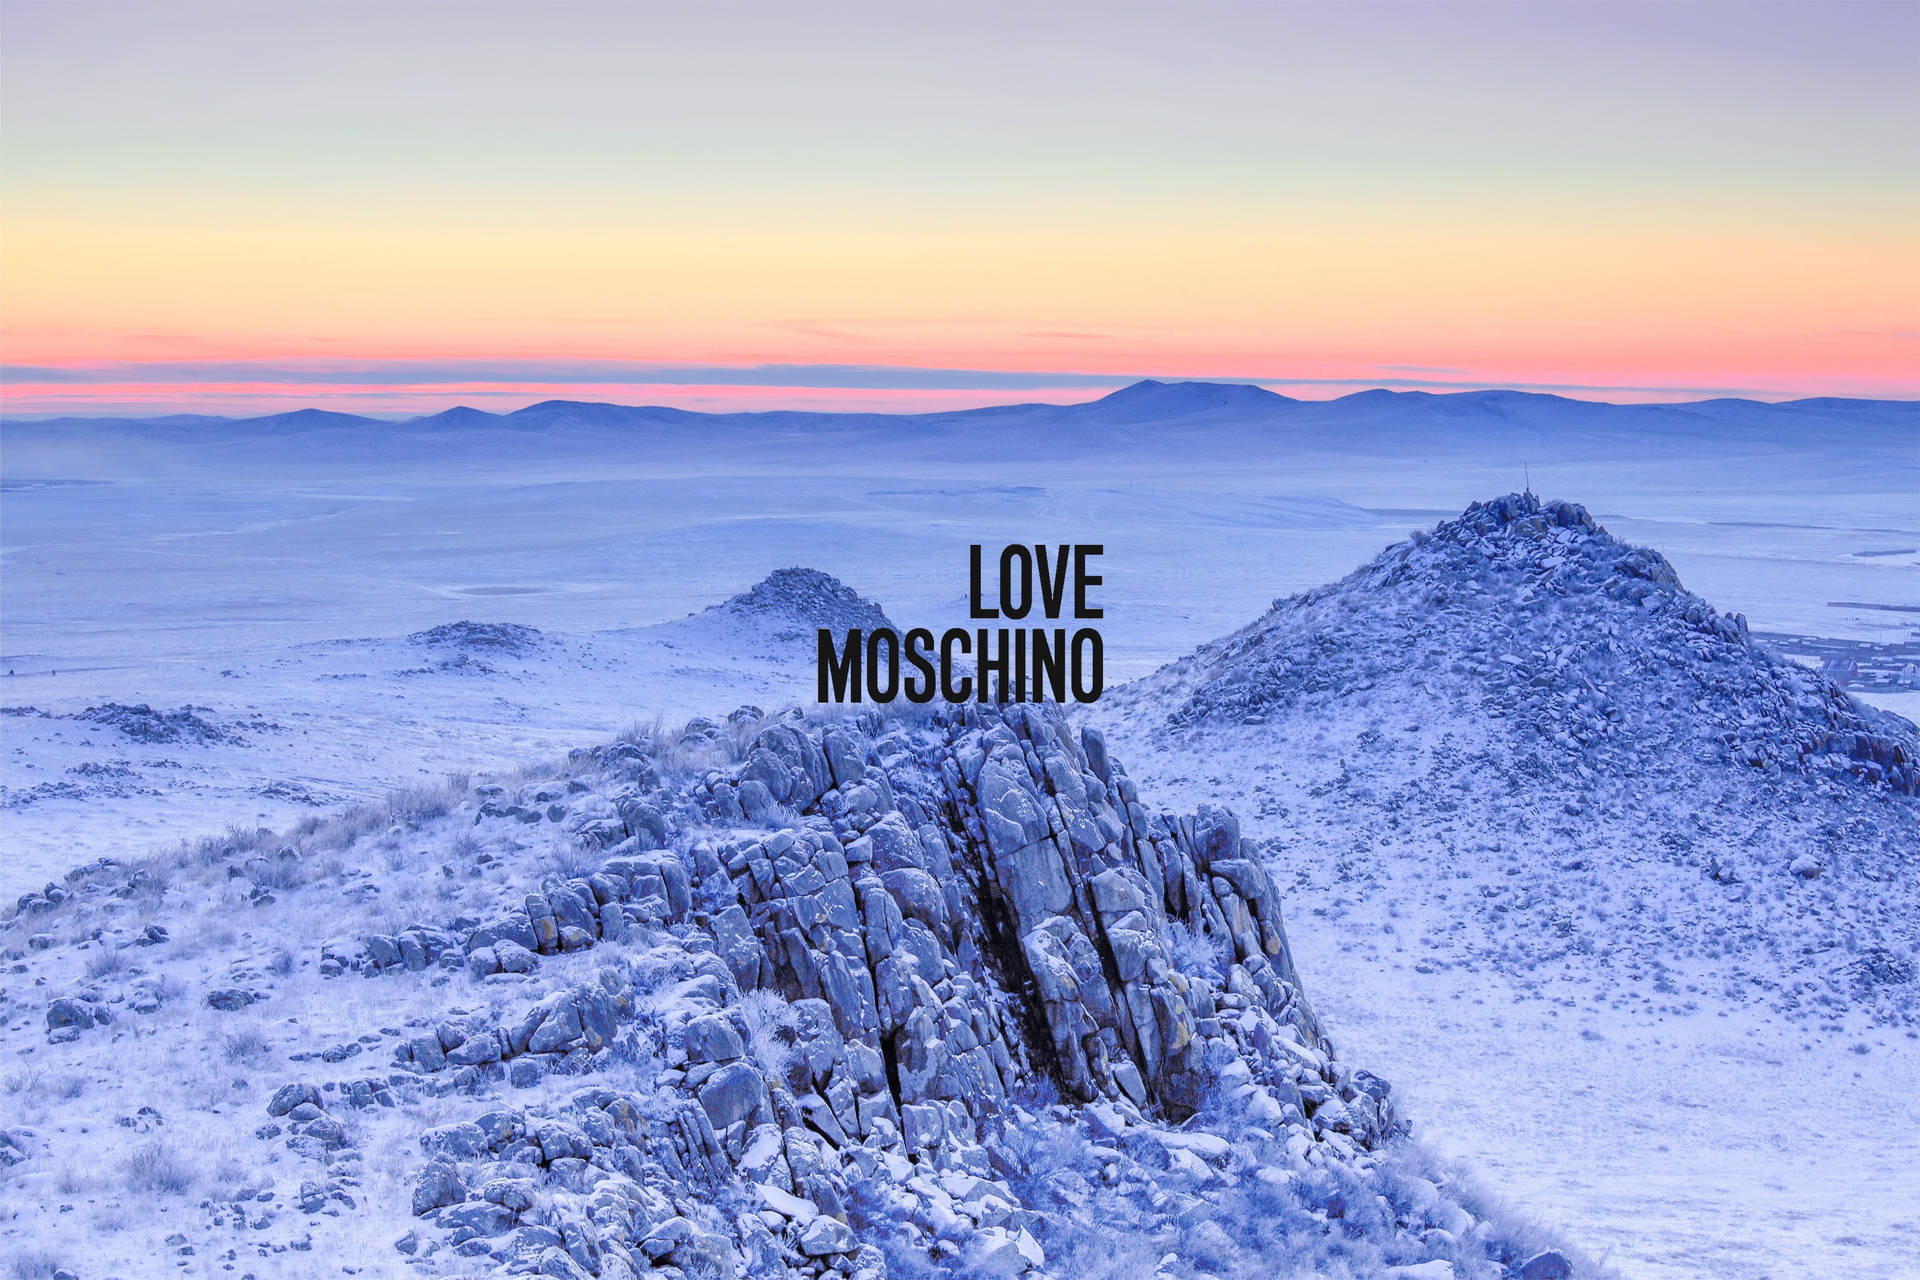 Love Moschino Snowy Mountains Background